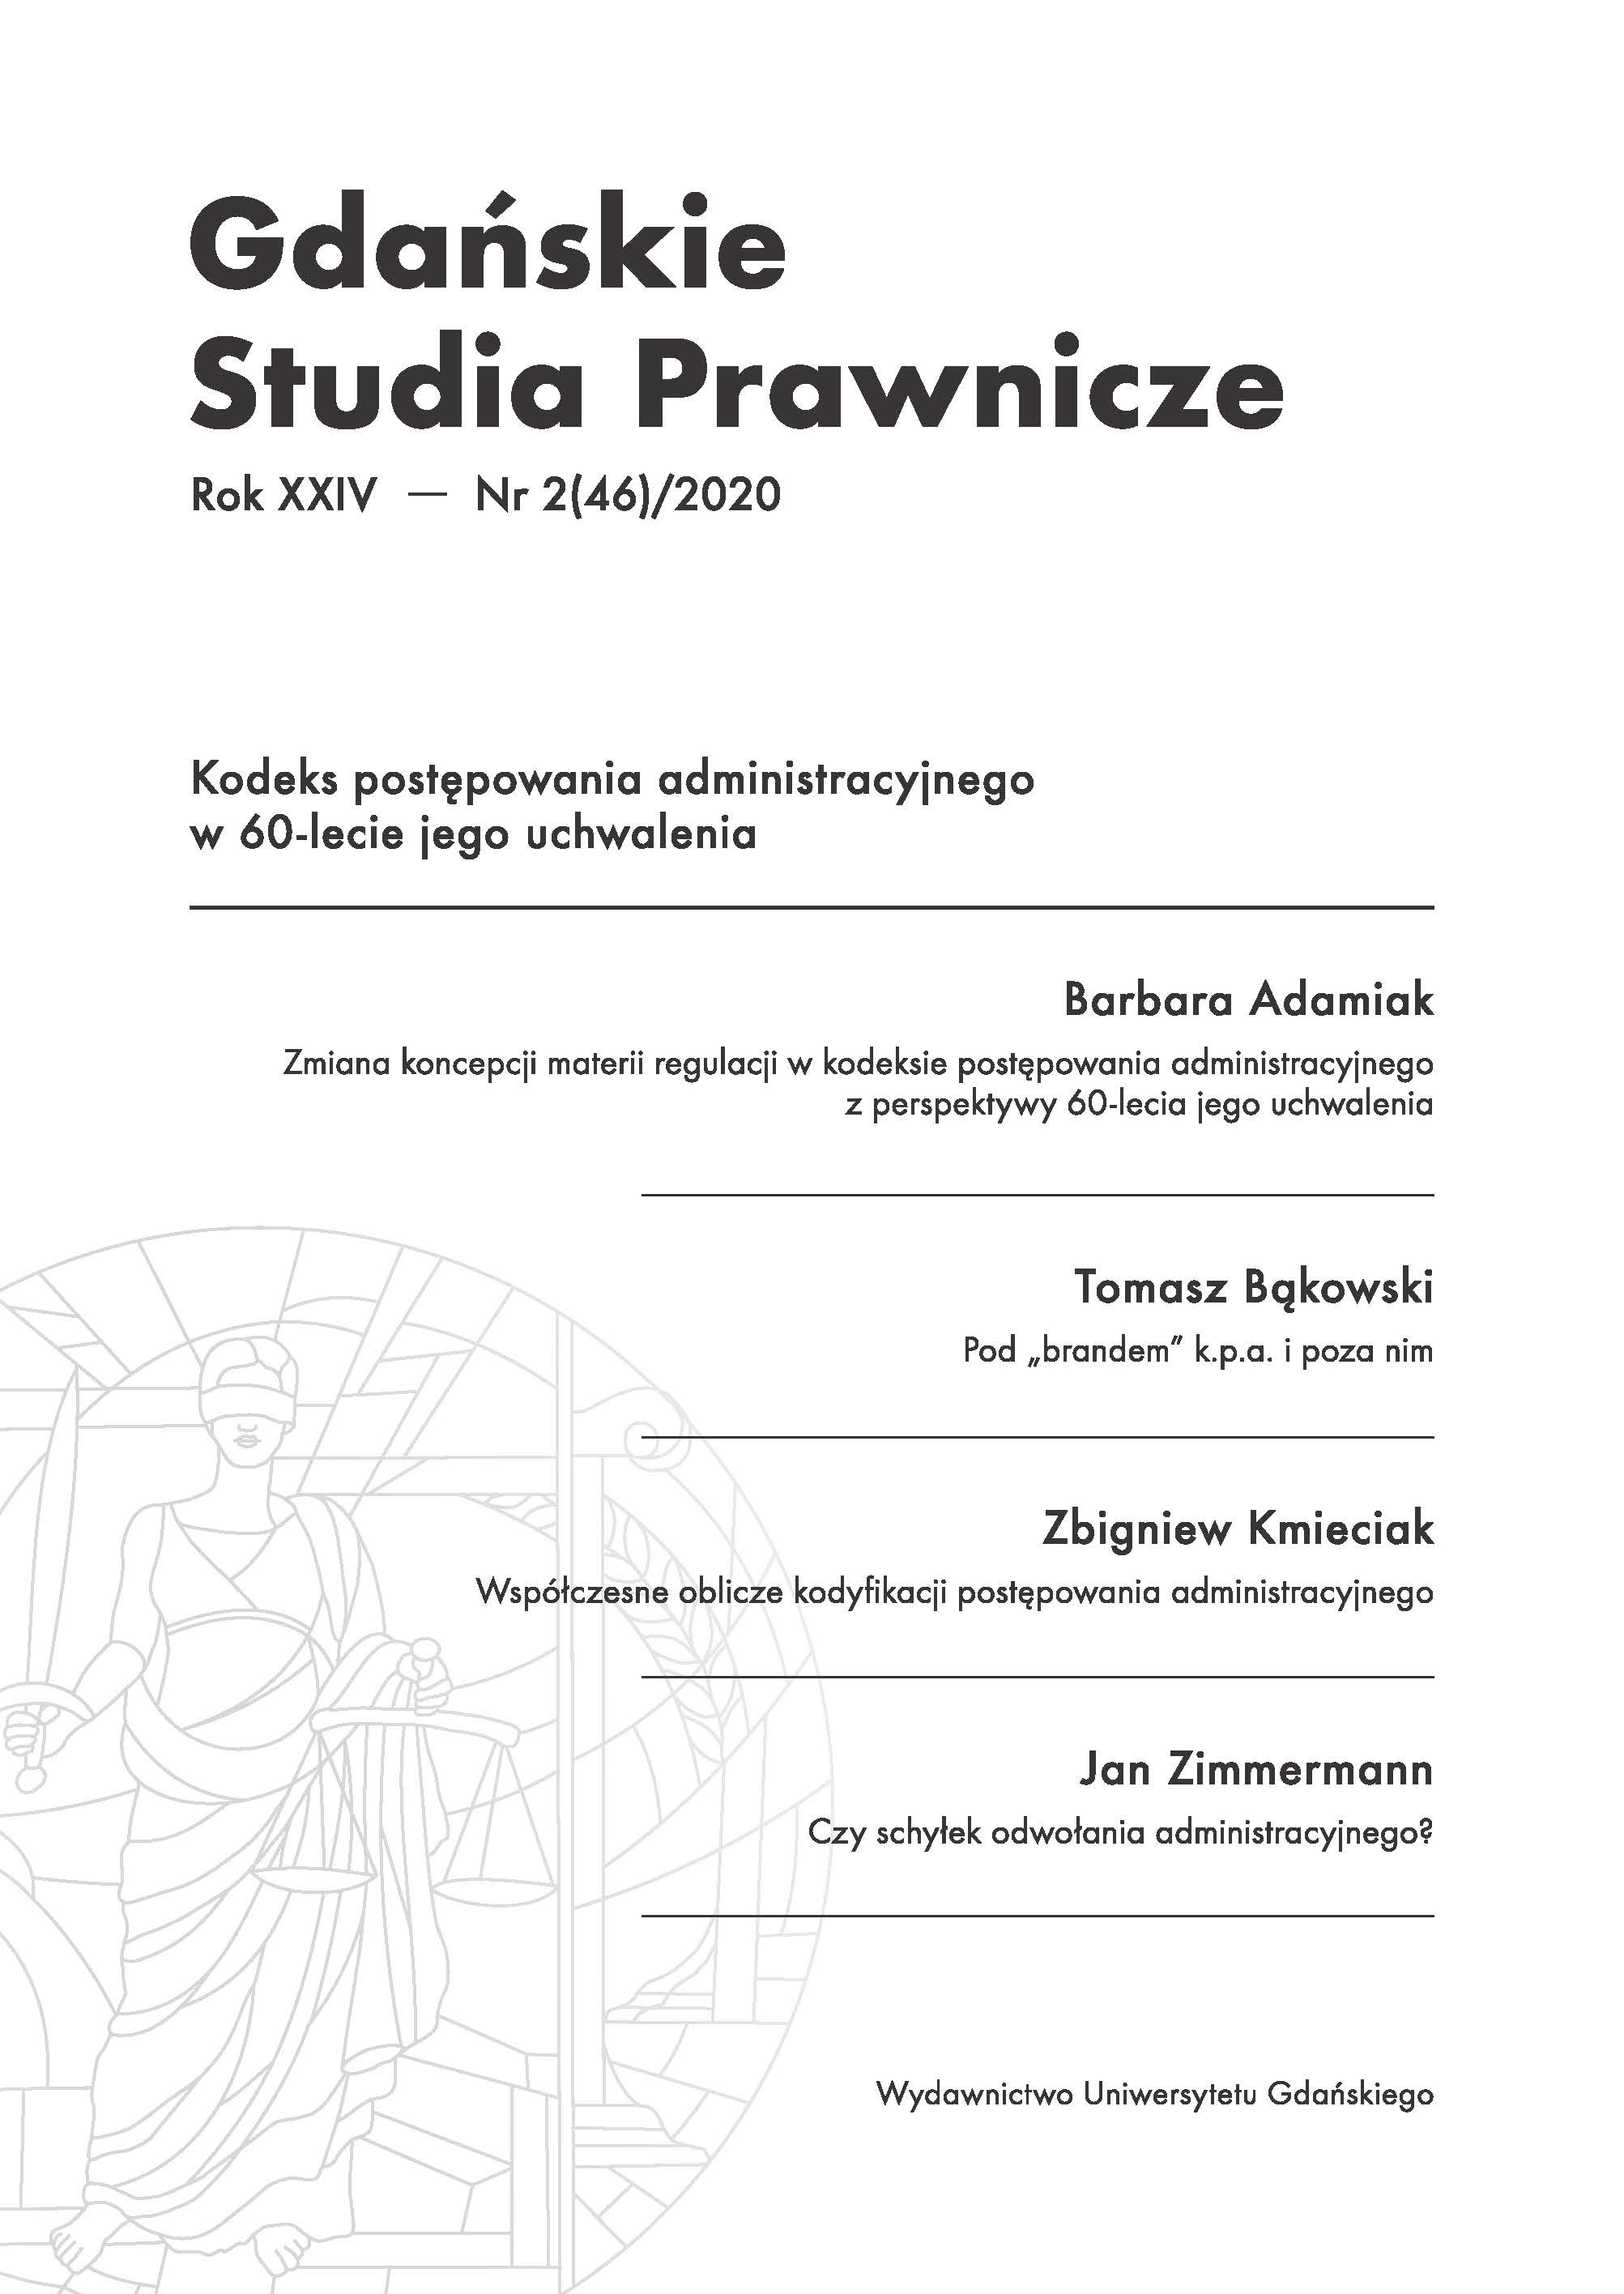 Conference of the Institute of Legal Sciences of the Polish Academy of Sciences “Code of Administrative Procedure after changes adopted in 2017–2019”, Warsaw, 9 October 2019 (report) Cover Image